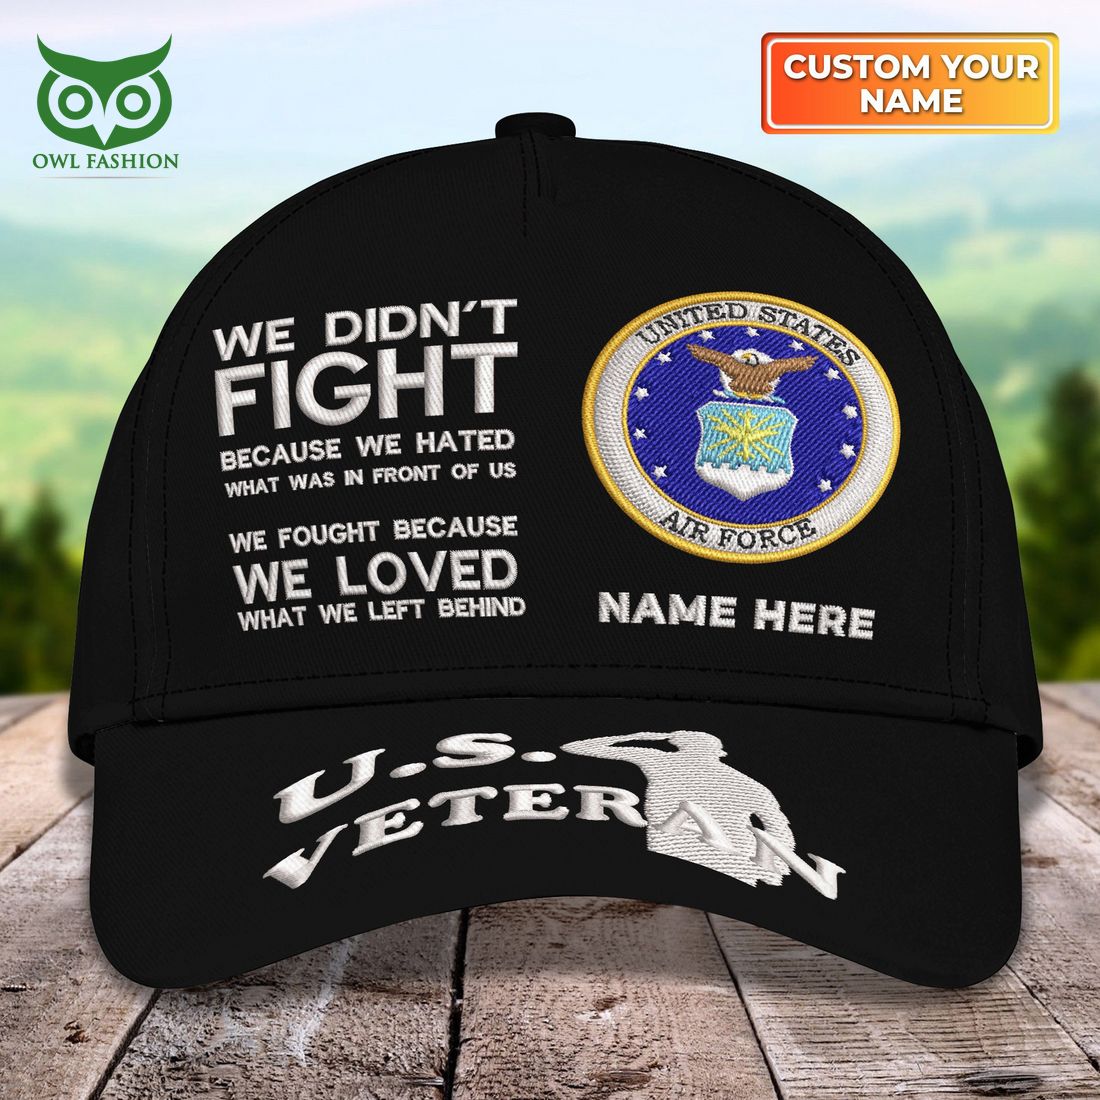 custom u s veterans u s a f we fought because we loved what we left behind classic cap 1 jtElR